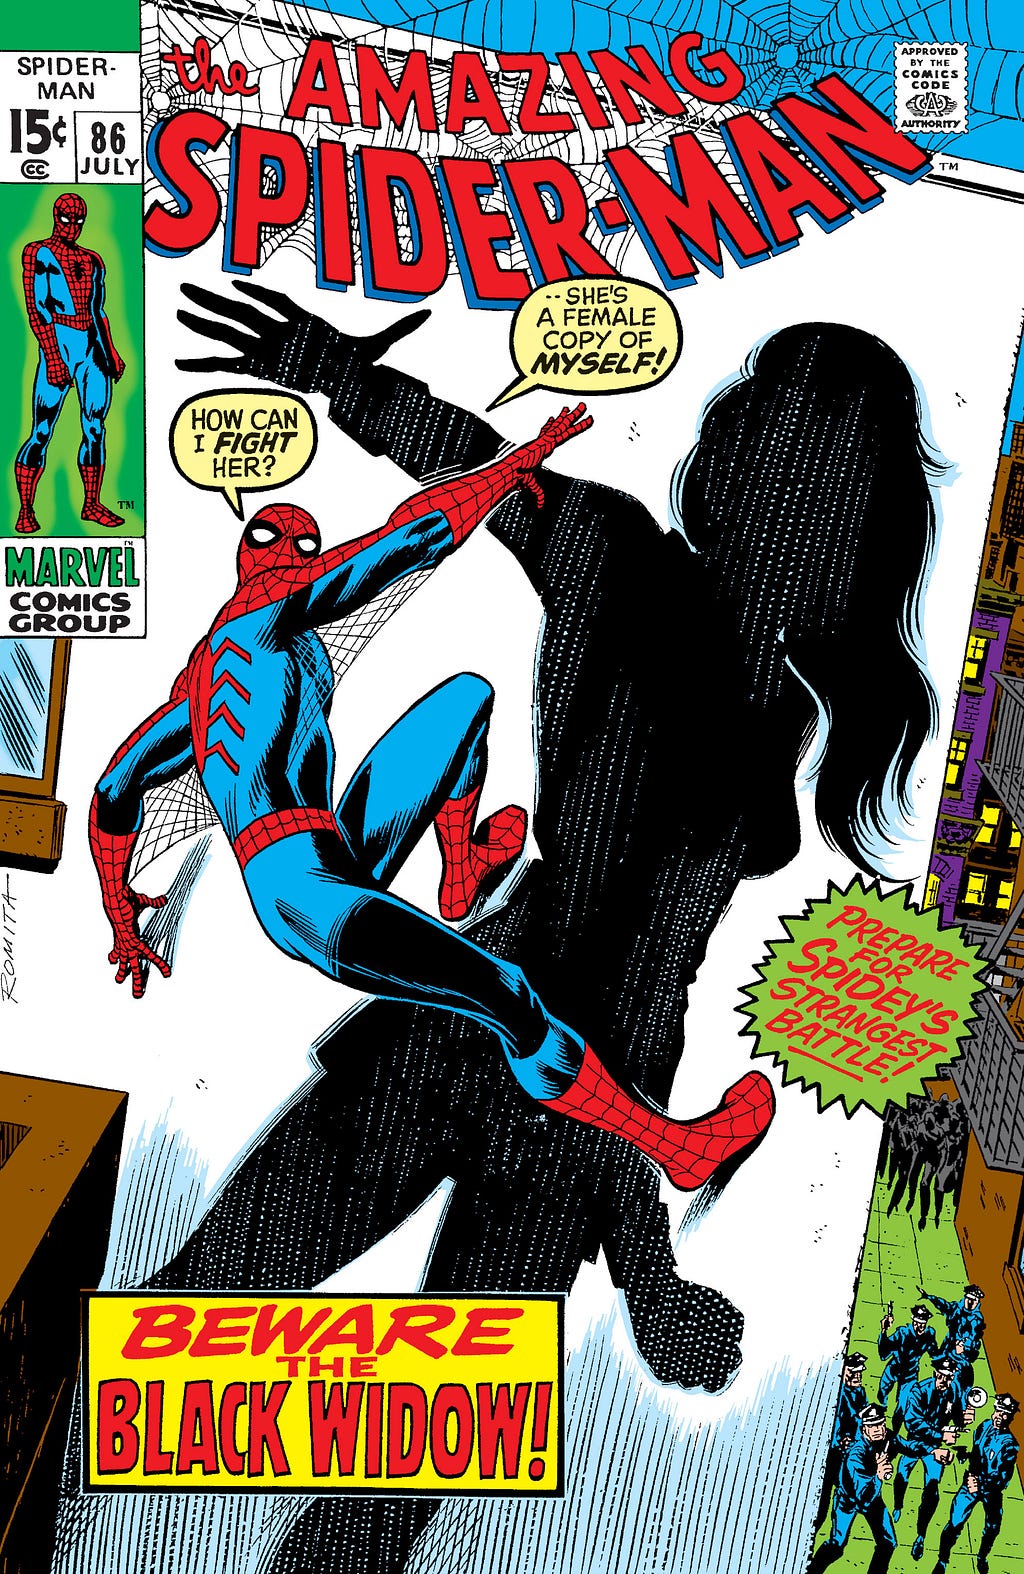 Comic book cover image for Amazing Spider-Man #86. It depicts Spider-Man climbing up a wall that has the silhouette of a woman on it (presumably Black Widow).